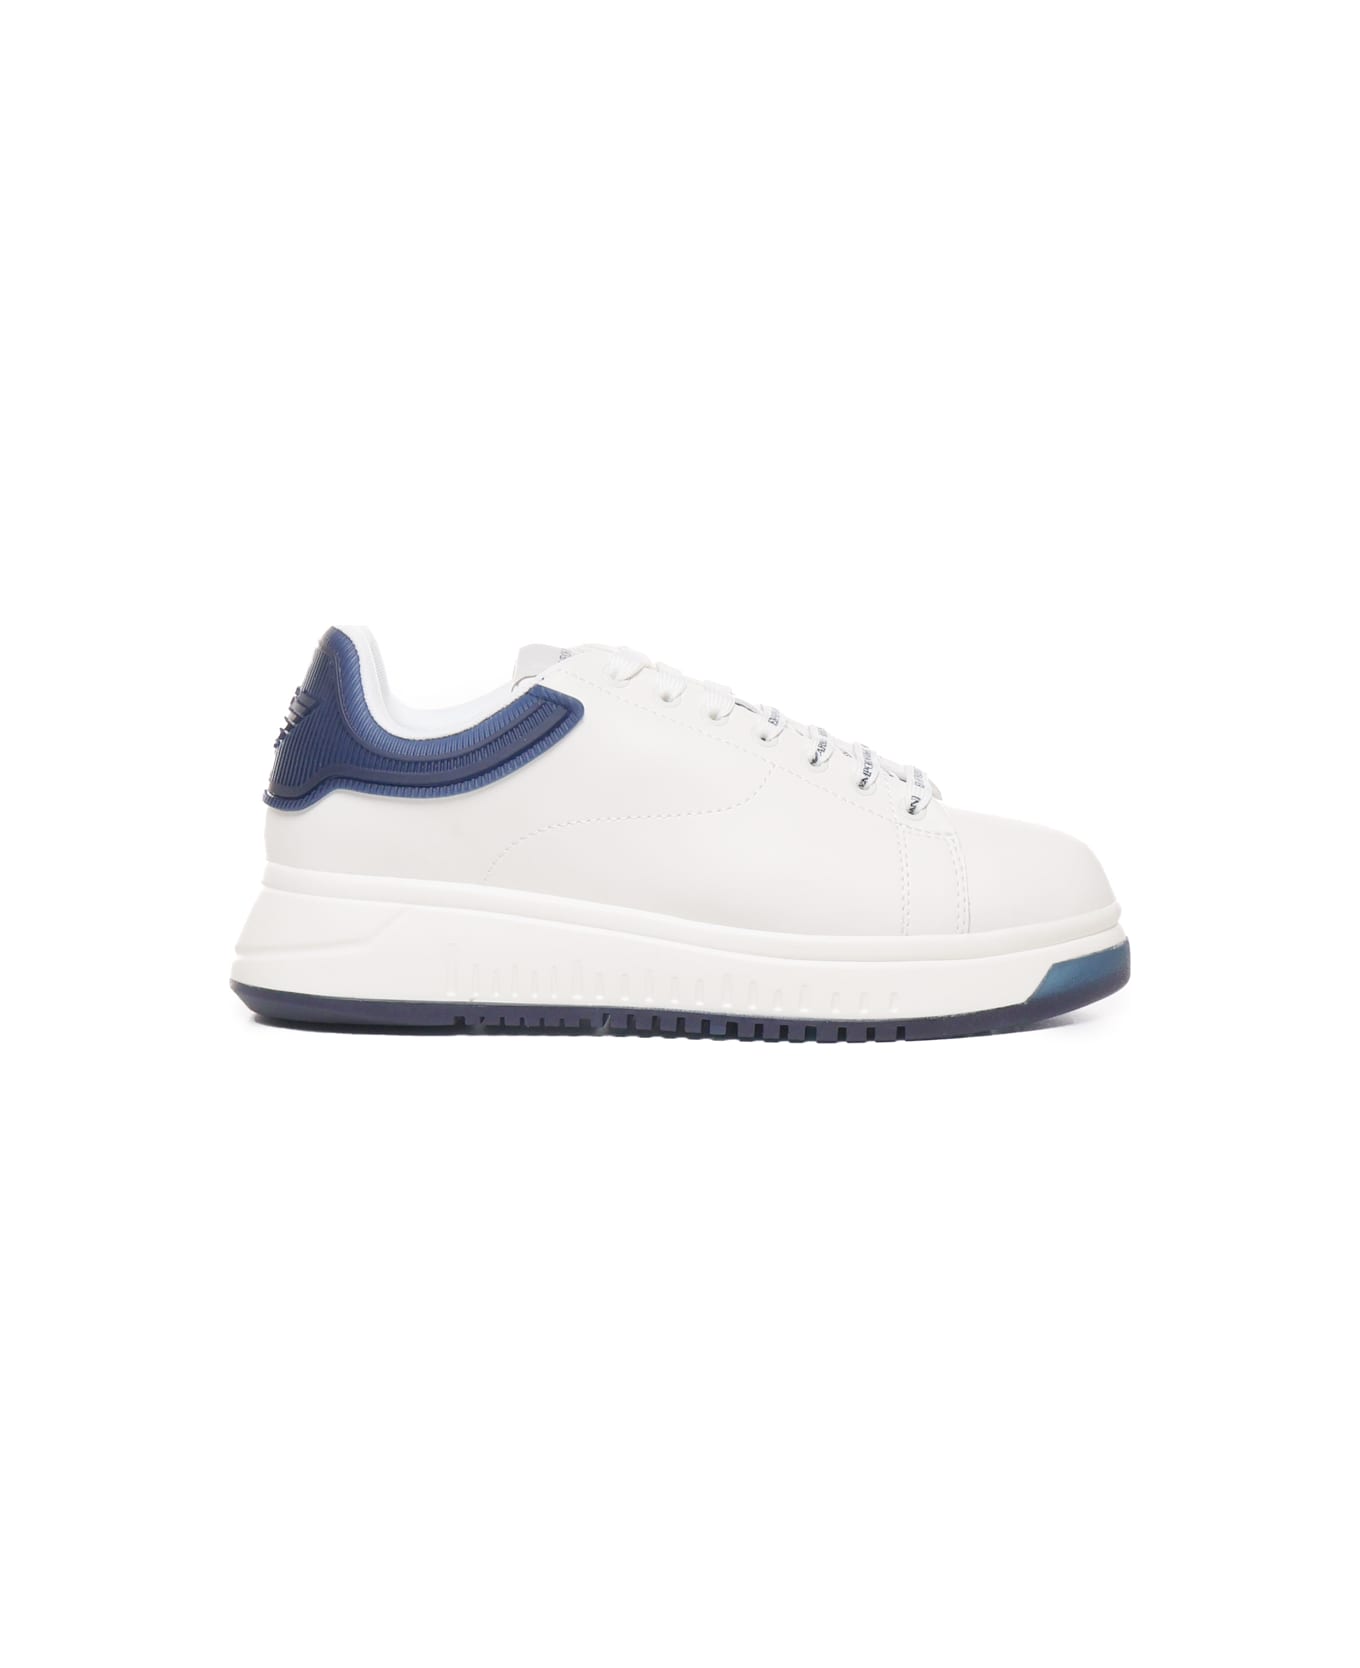 Emporio Armani Sneakers With Contrasting Rivet - Blue